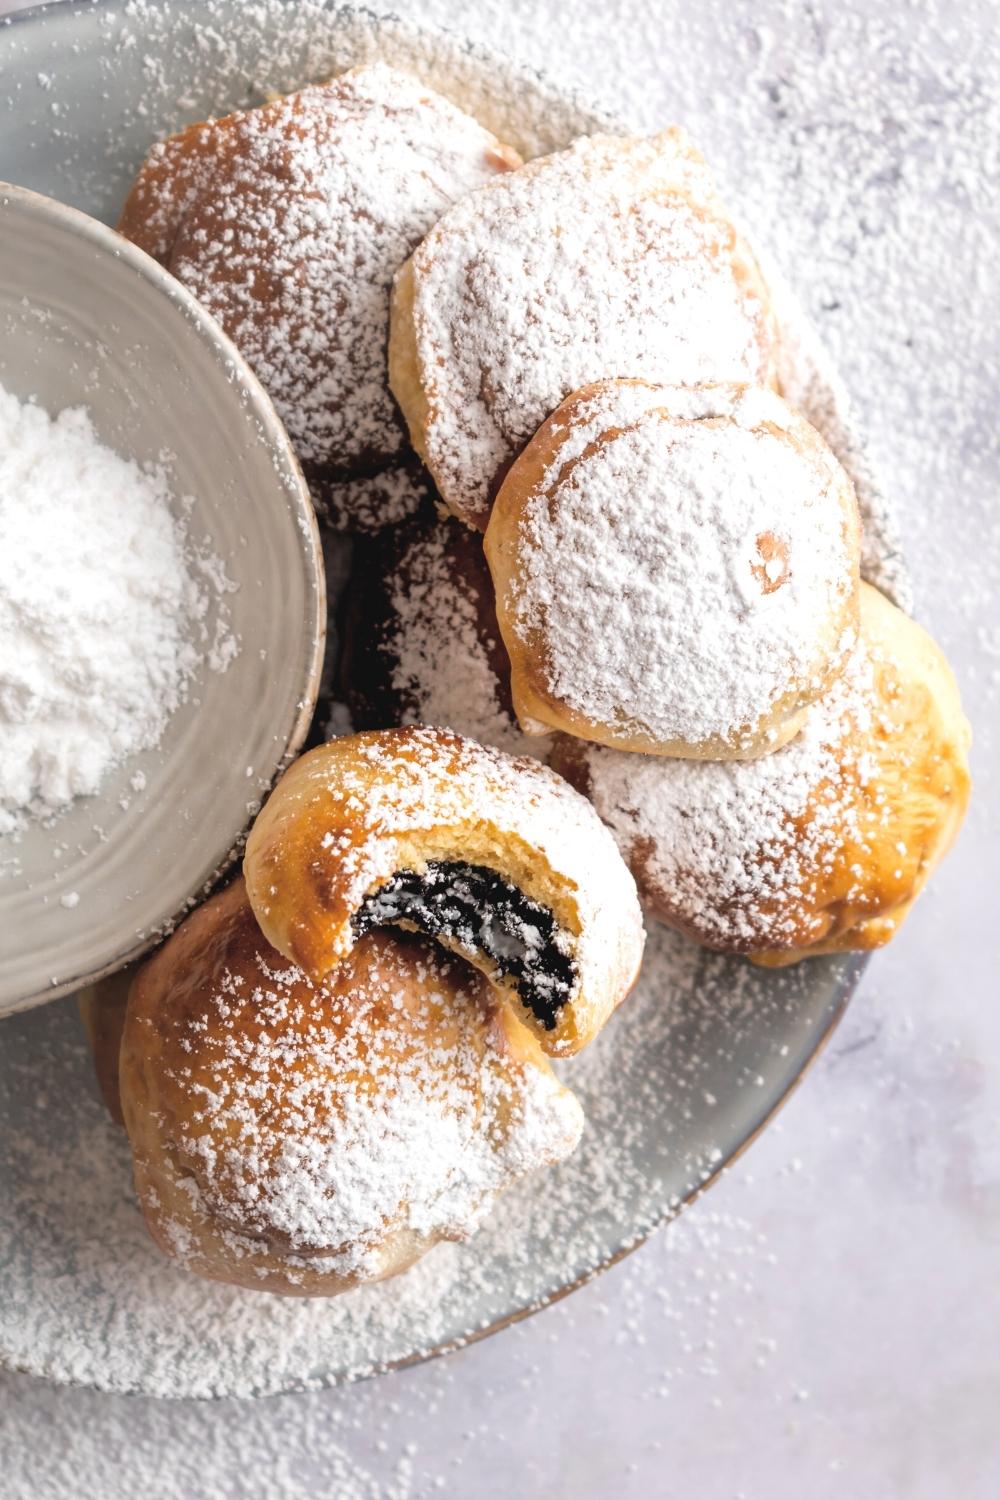 In the air fryer fried Oreo with a bite out of the front of it and another fried Oreo with a bunch of fried Oreos stacked on top of each other behind it all on a gray plate on a white counter. Next to the Oreos is part of a bowl with powdered sugar in it.